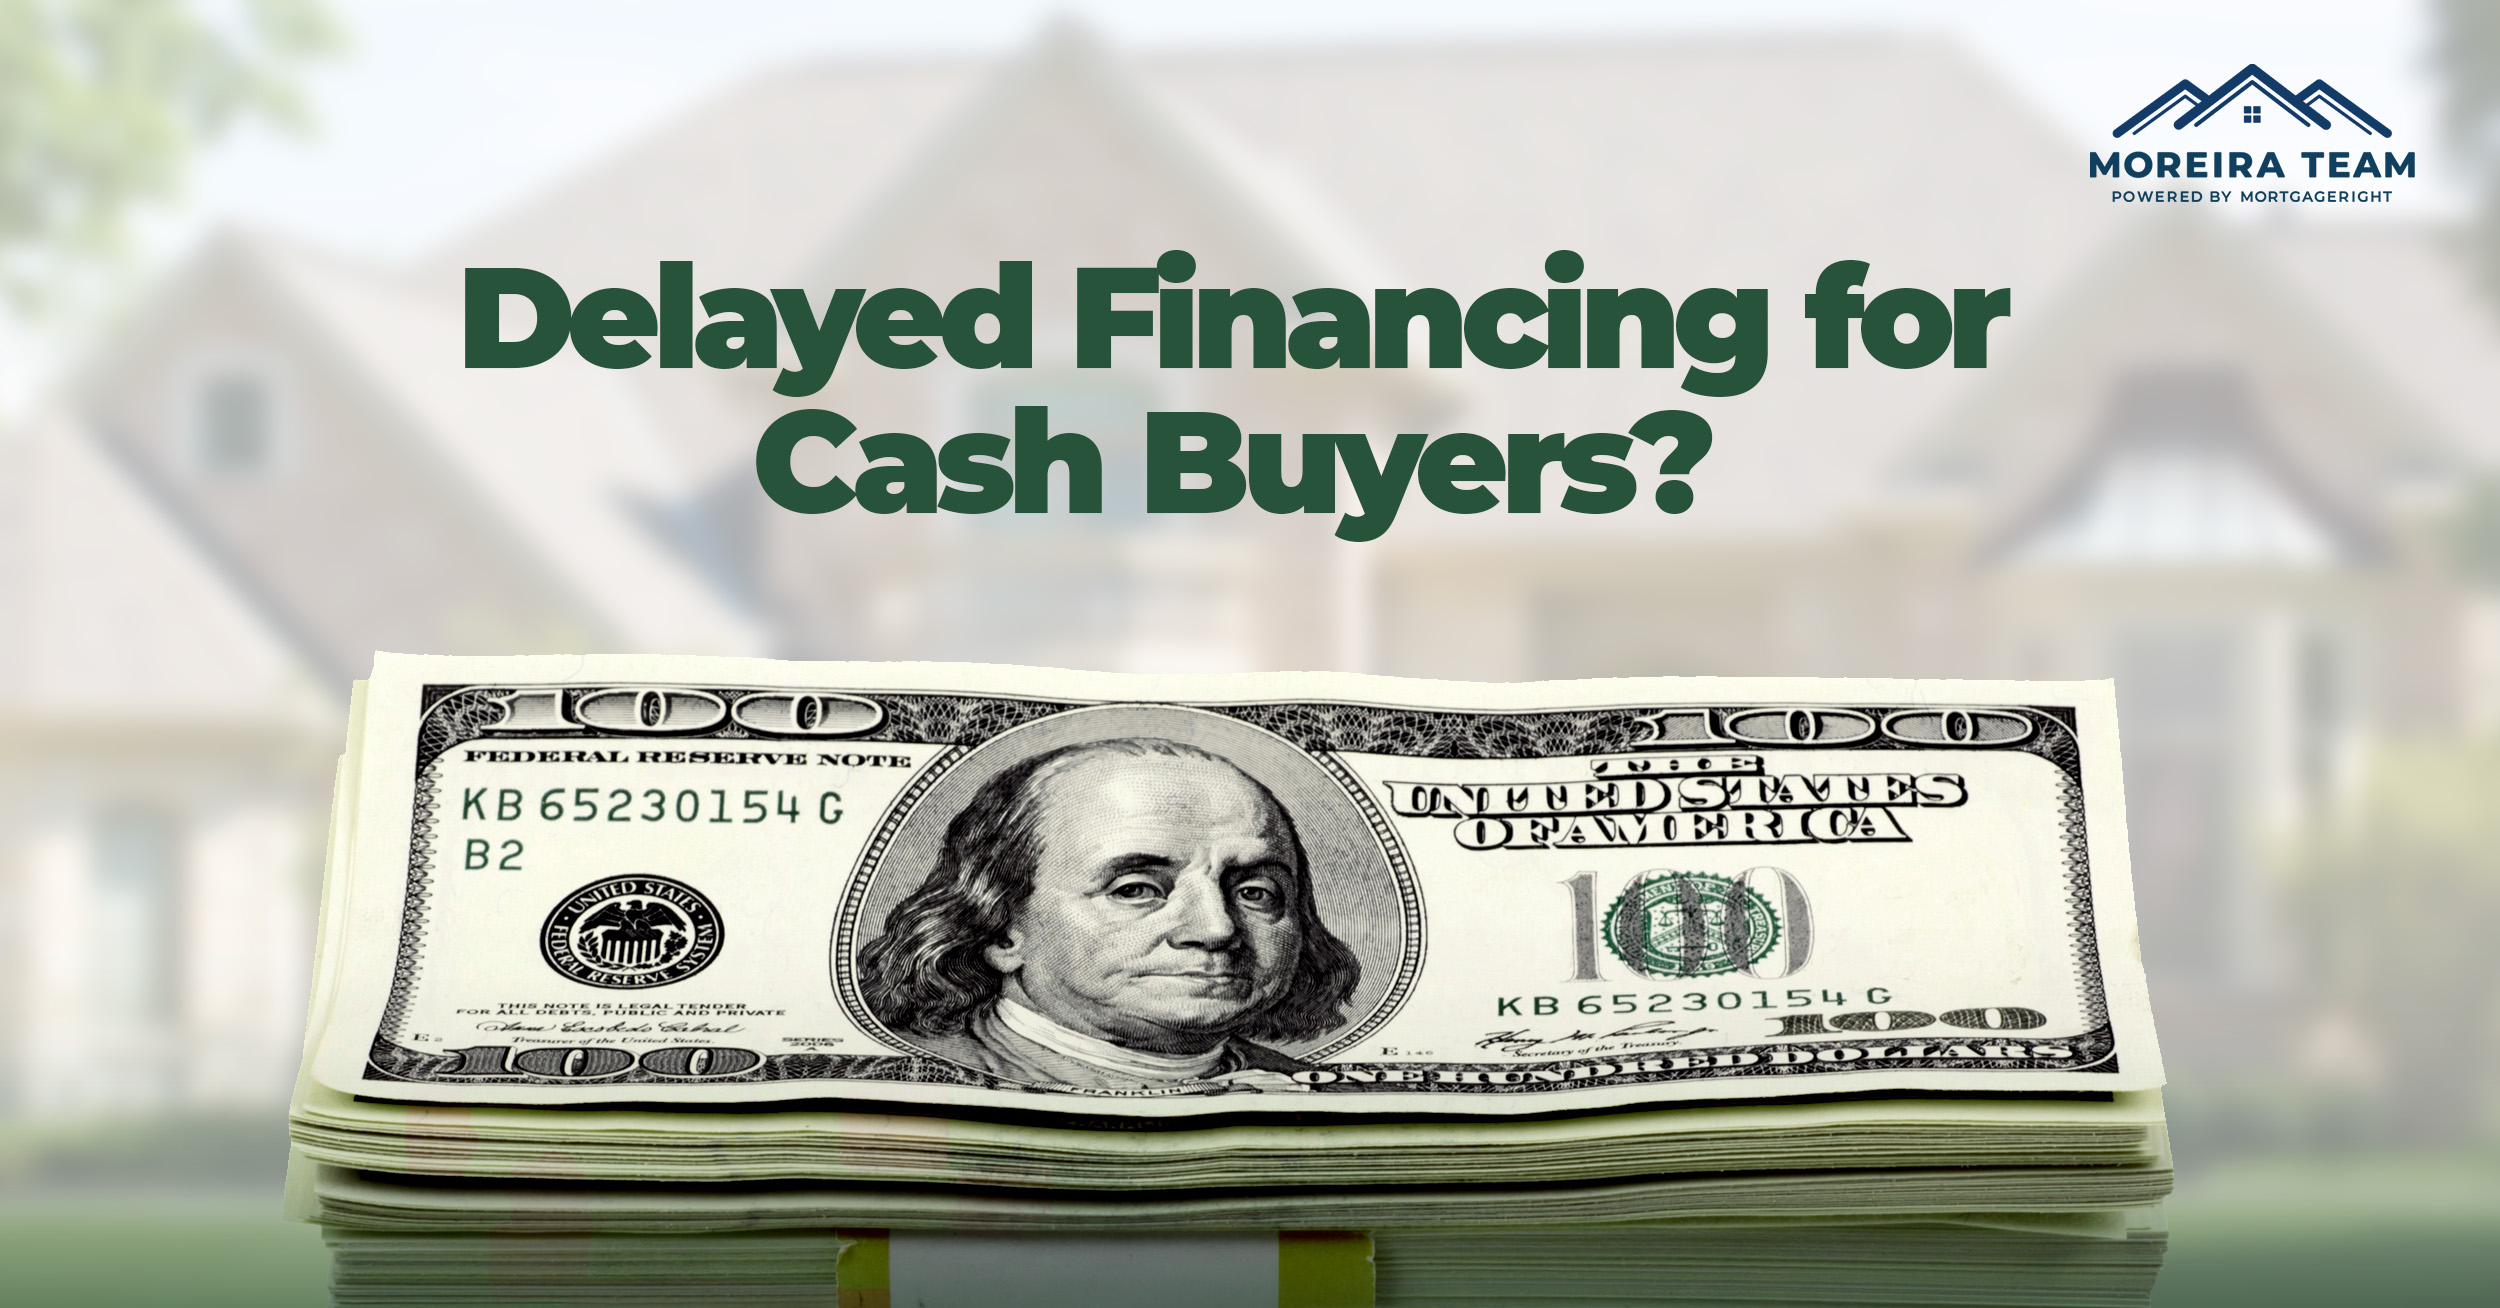 What is Delayed Financing for Cash Buyers?